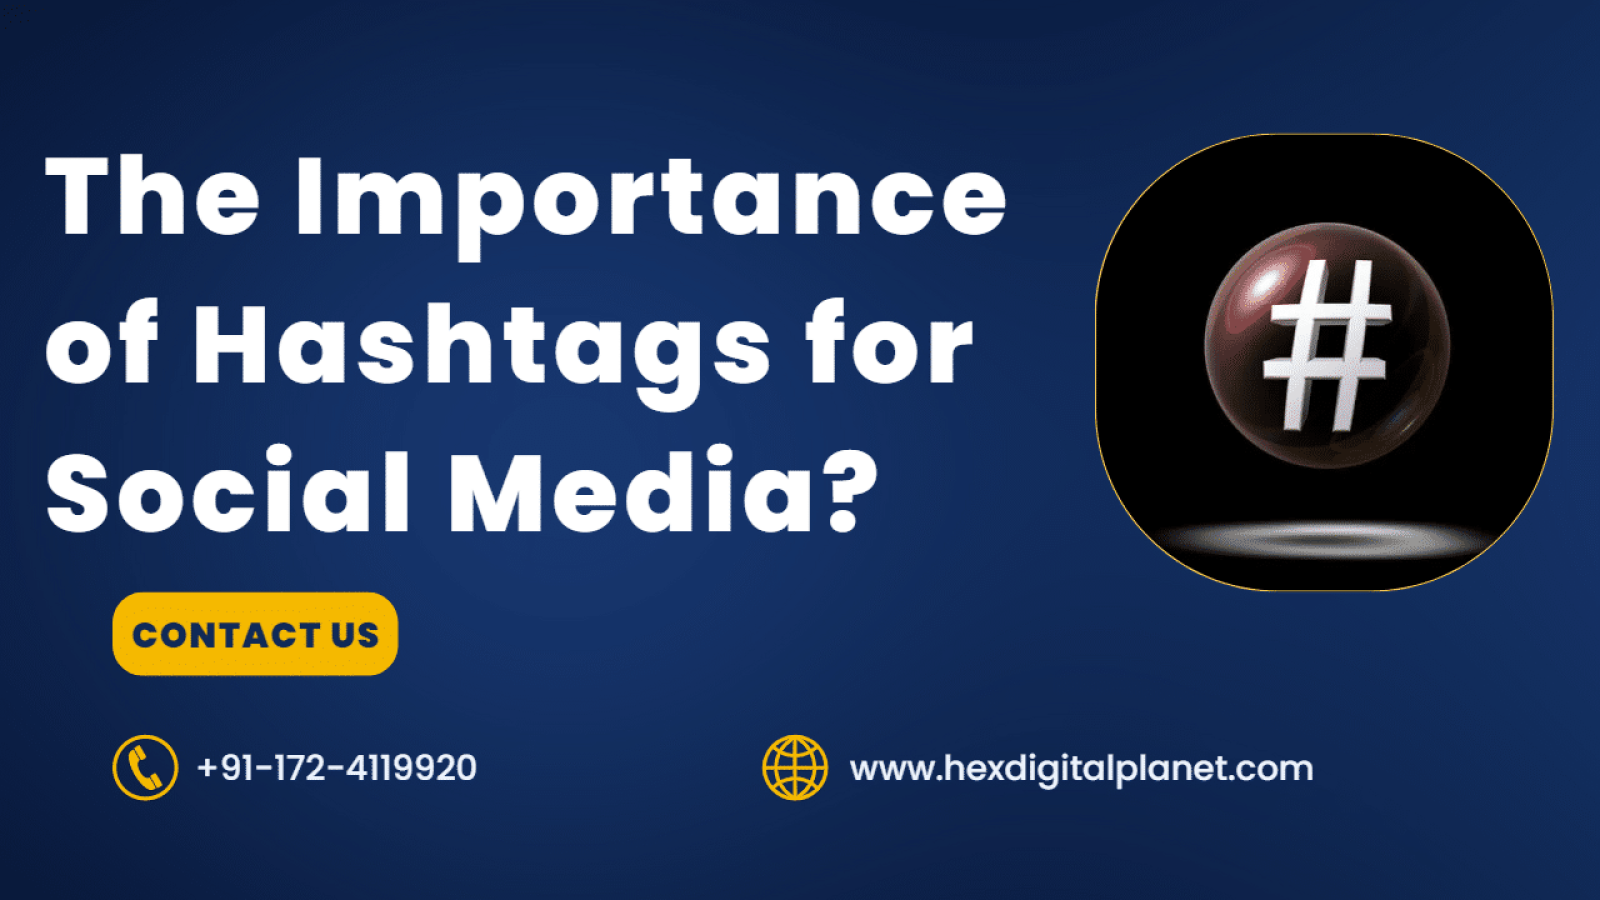 The Importance of Hashtags for Social Media